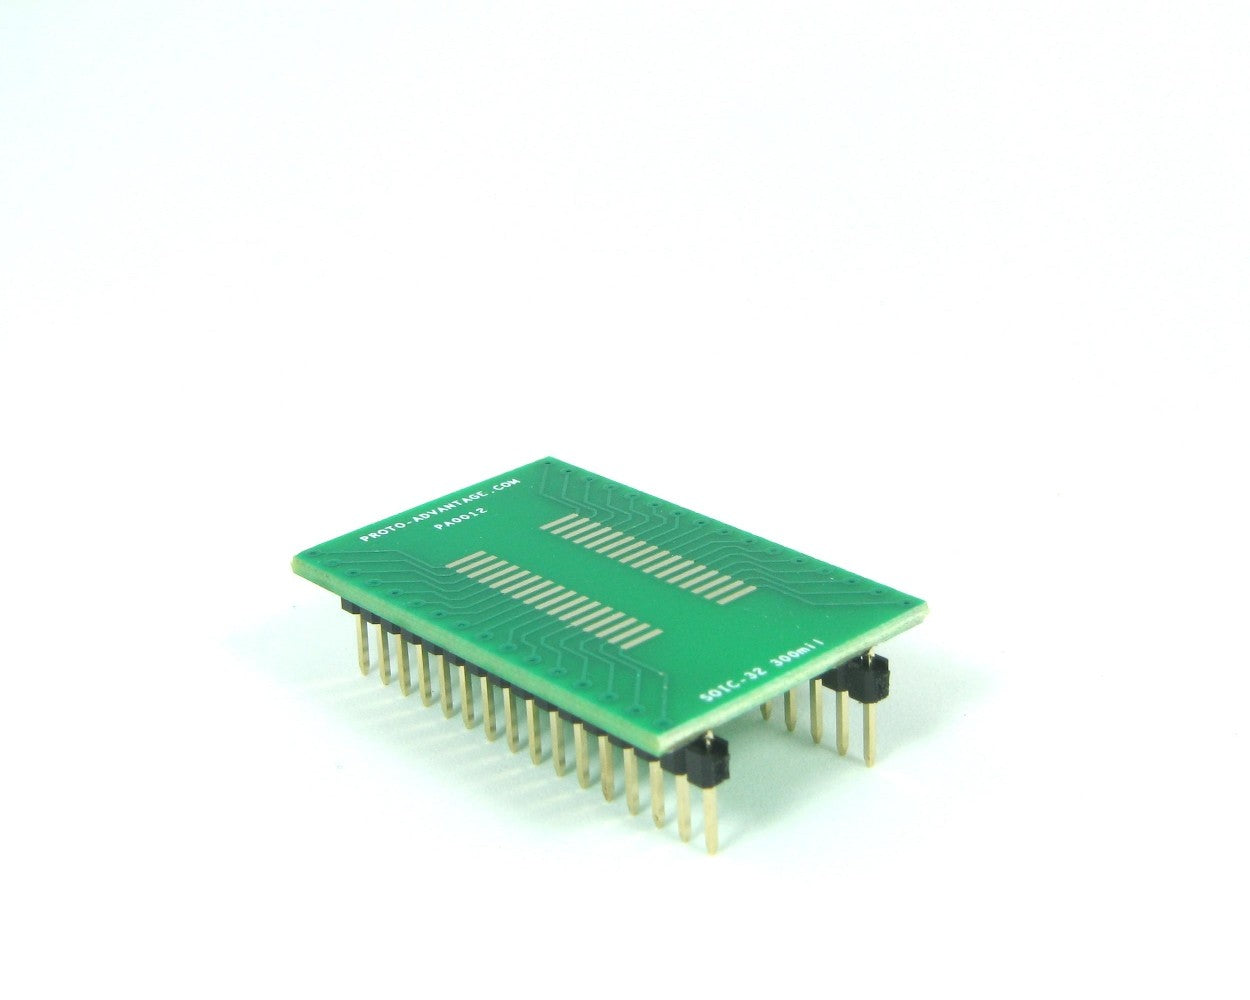 SOIC-32 to DIP-32 SMT Adapter (1.27 mm pitch, 300 mil body)